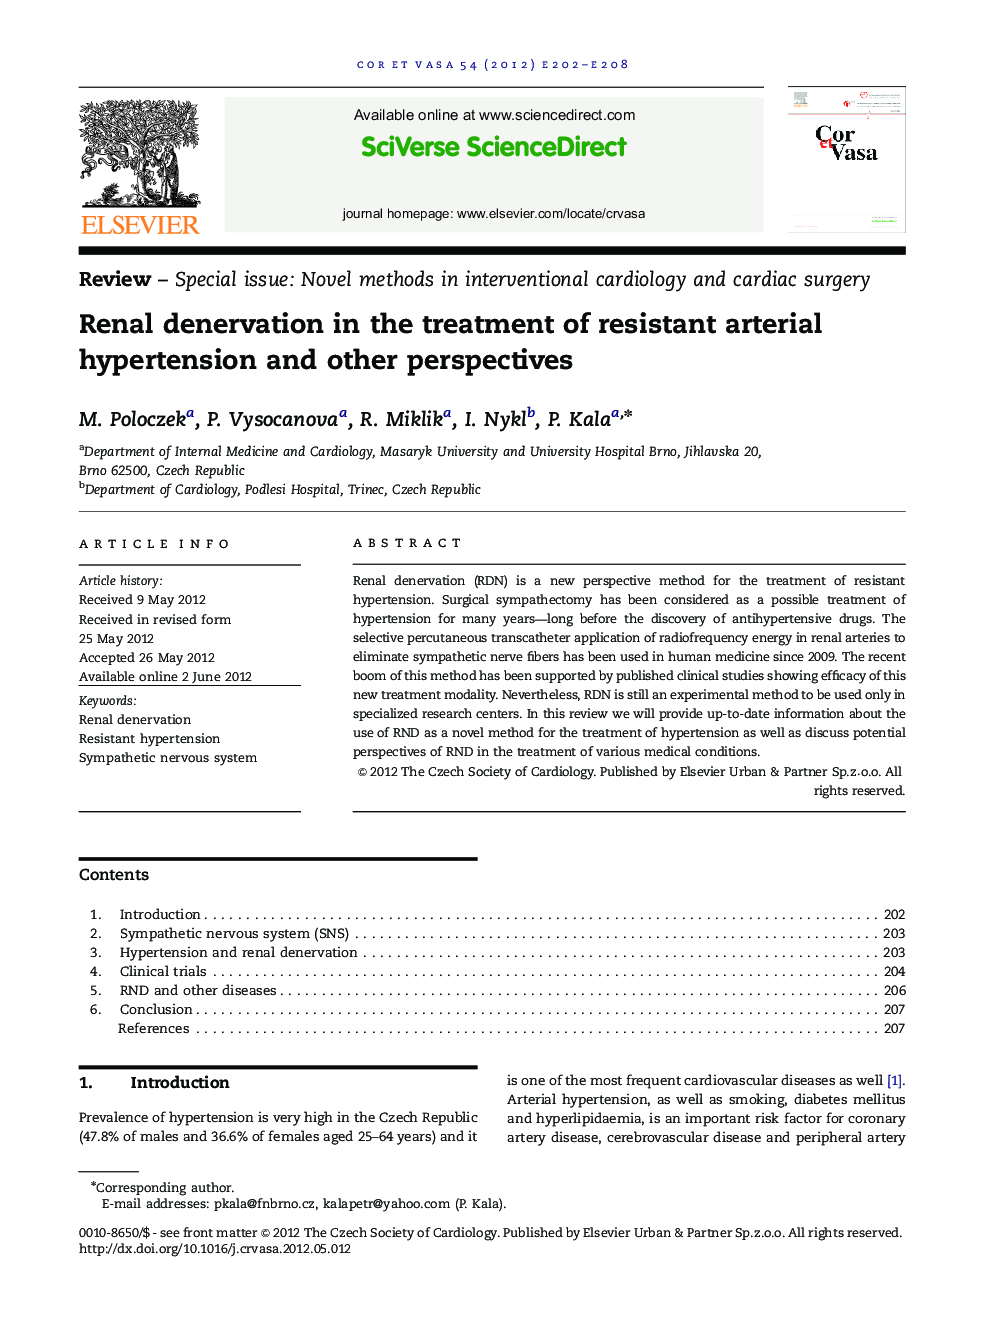 Renal denervation in the treatment of resistant arterial hypertension and other perspectives